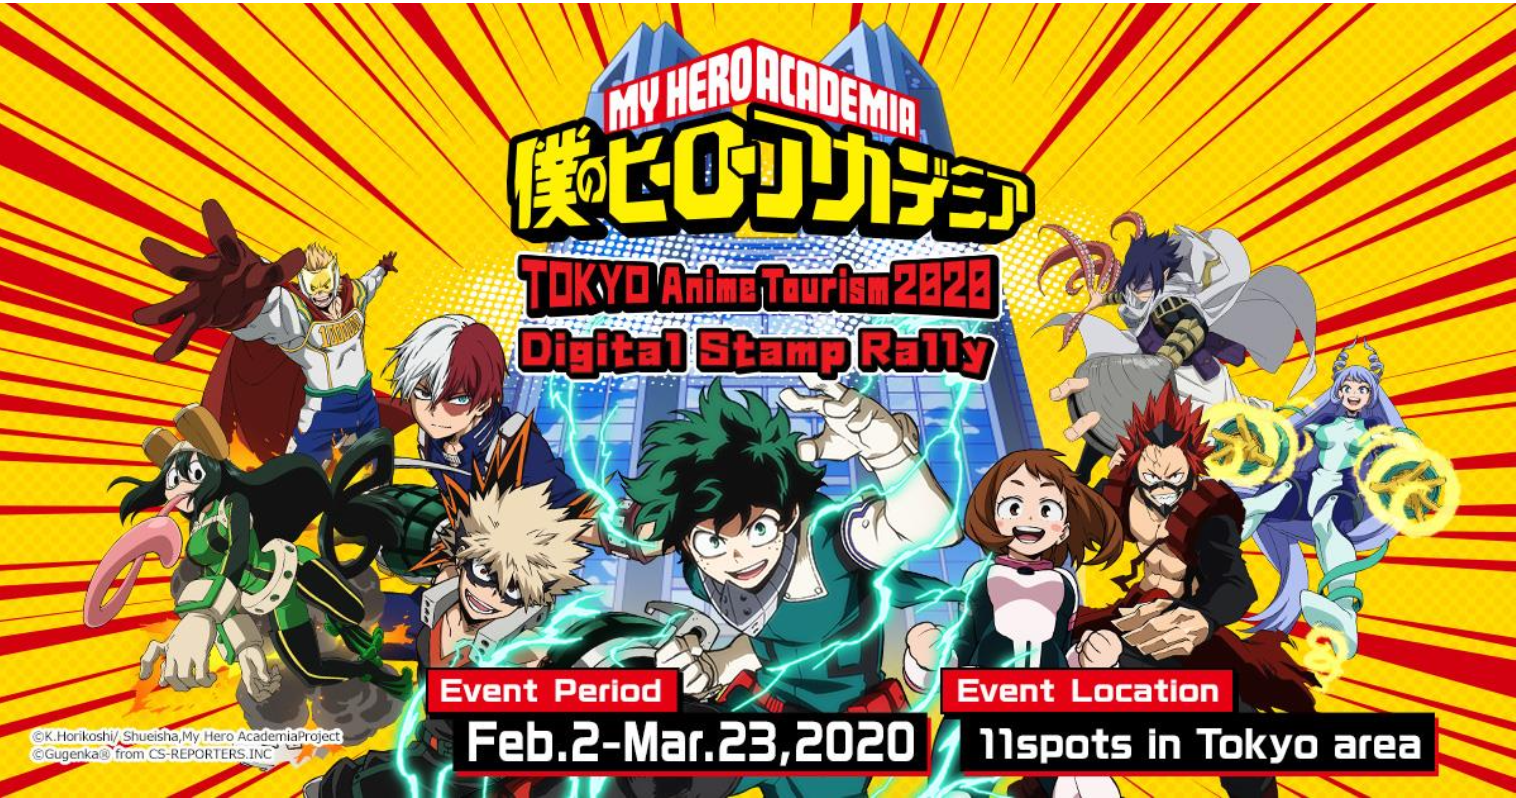 Image for Stamp rally in collaboration with the world-famous “My HeroAcademia” manga series